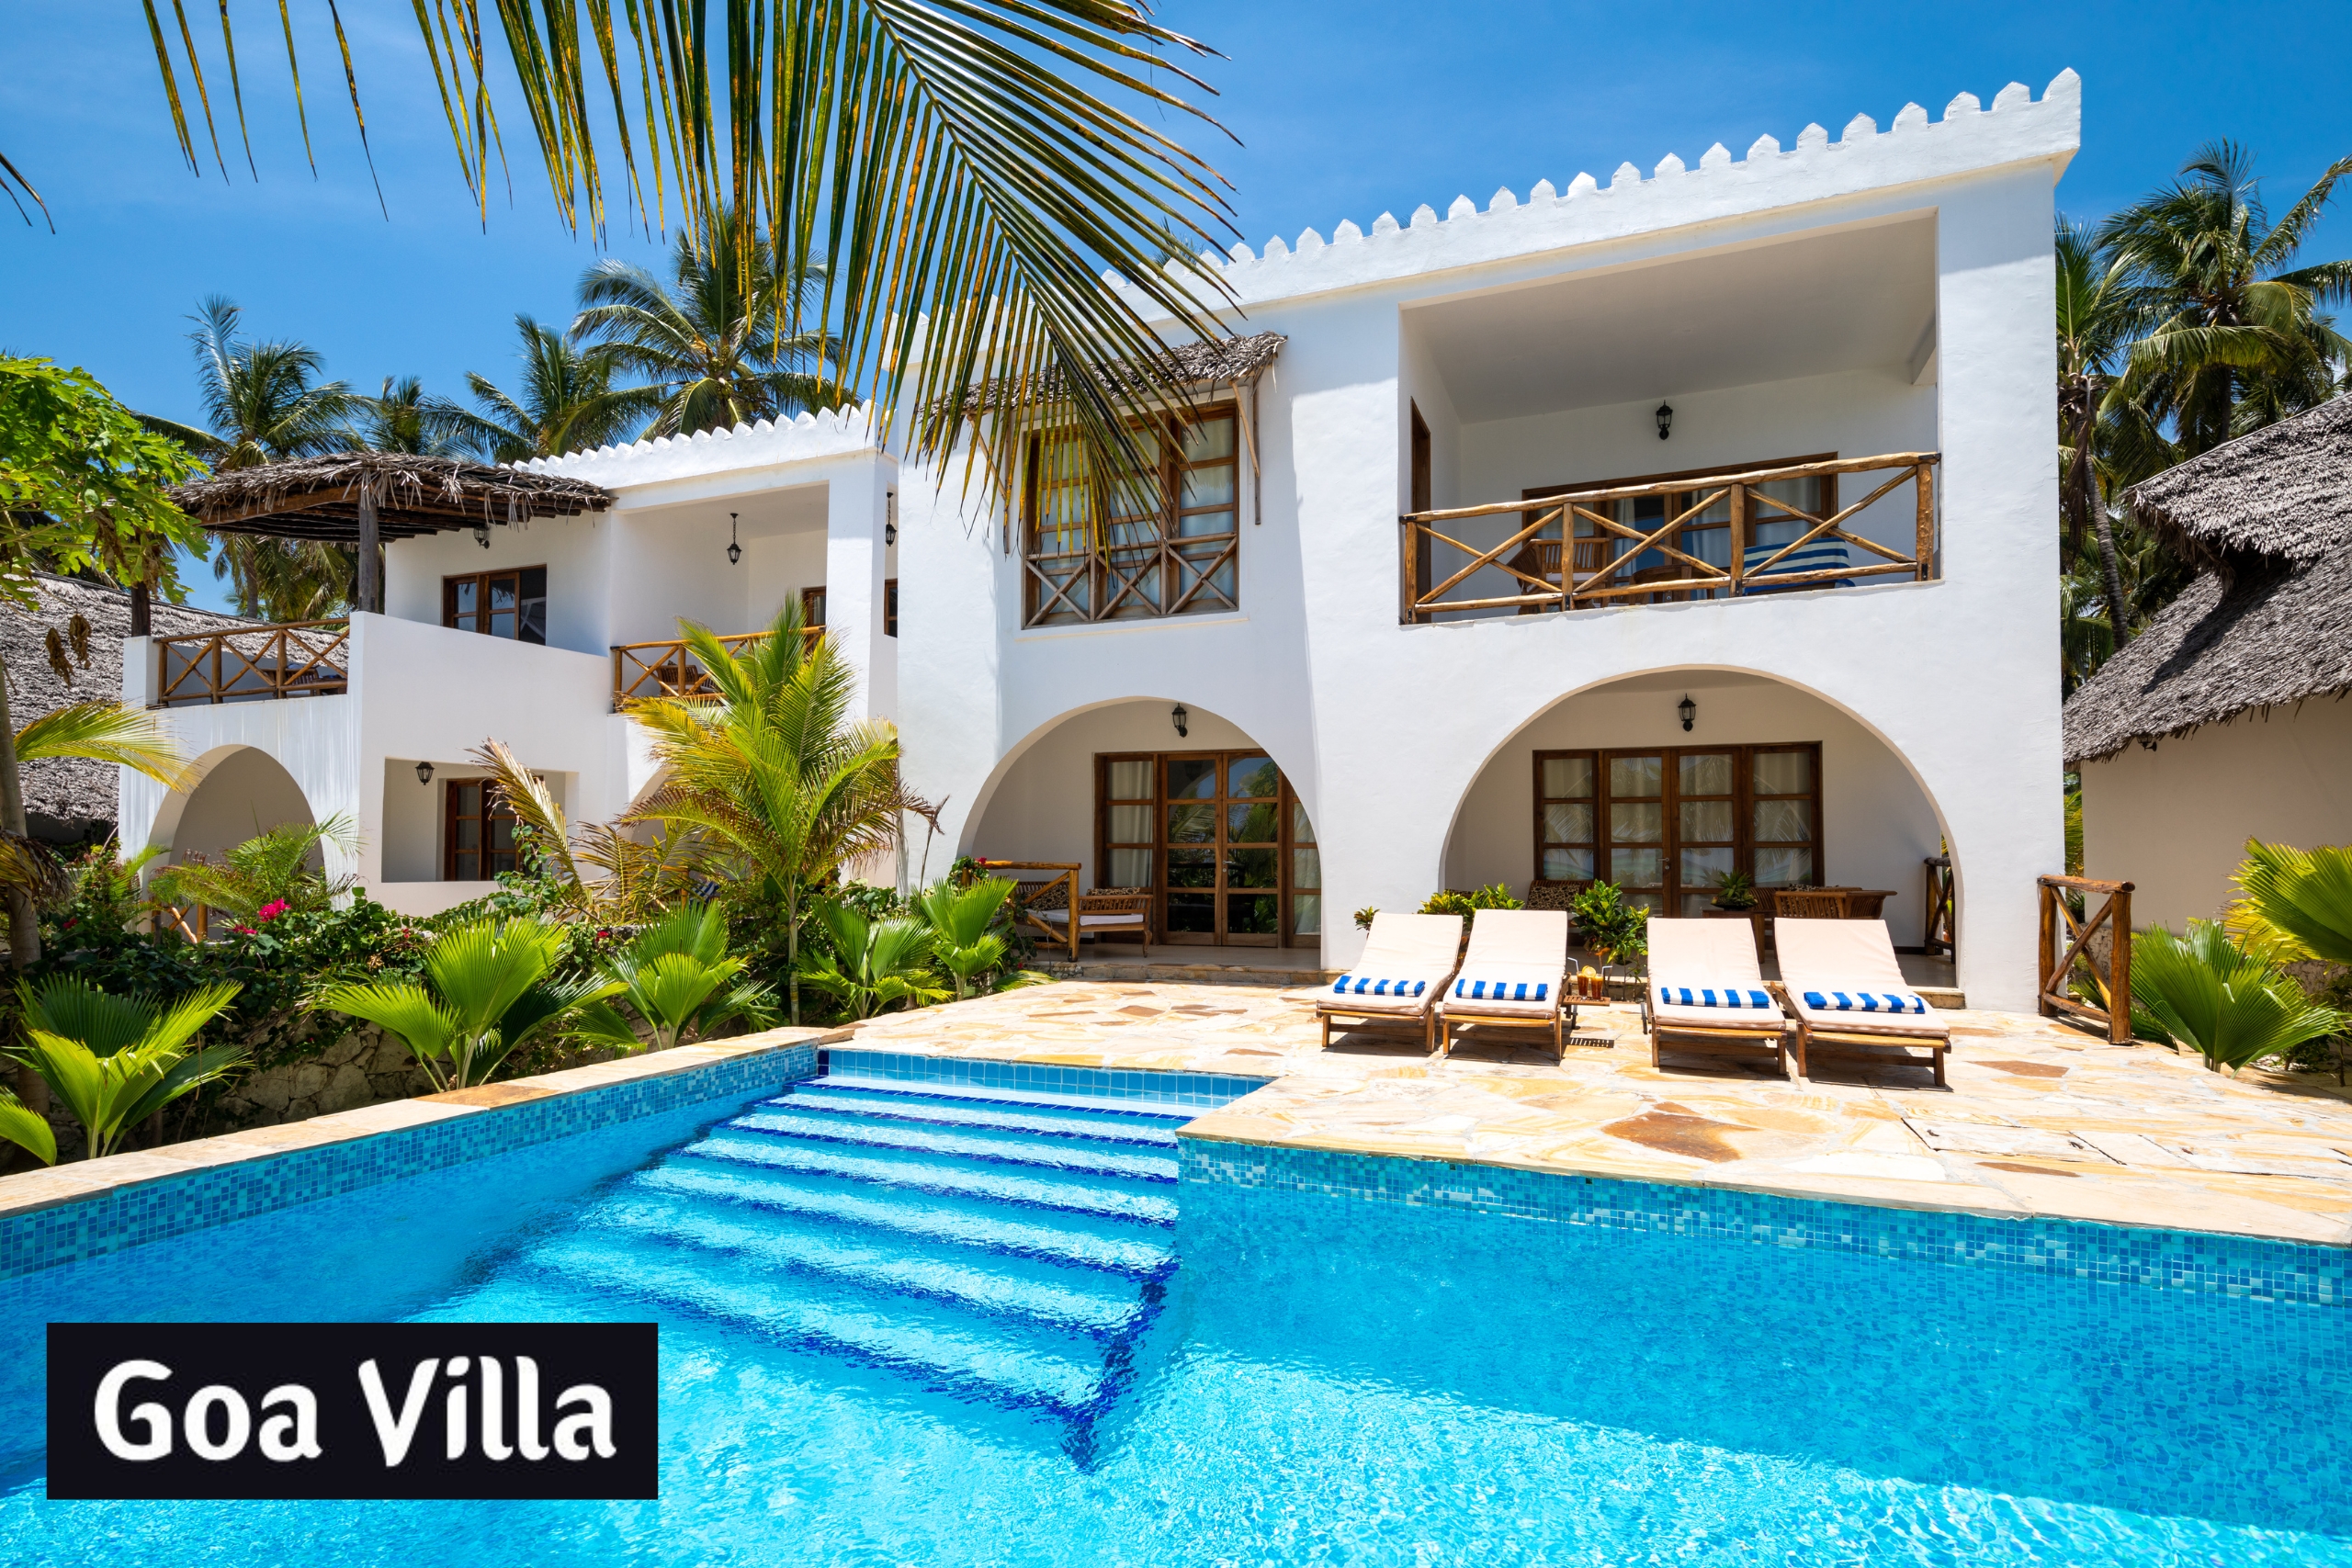 Family-Friendly Vacation Rentals: Discover What GoaVilla Has To Offer